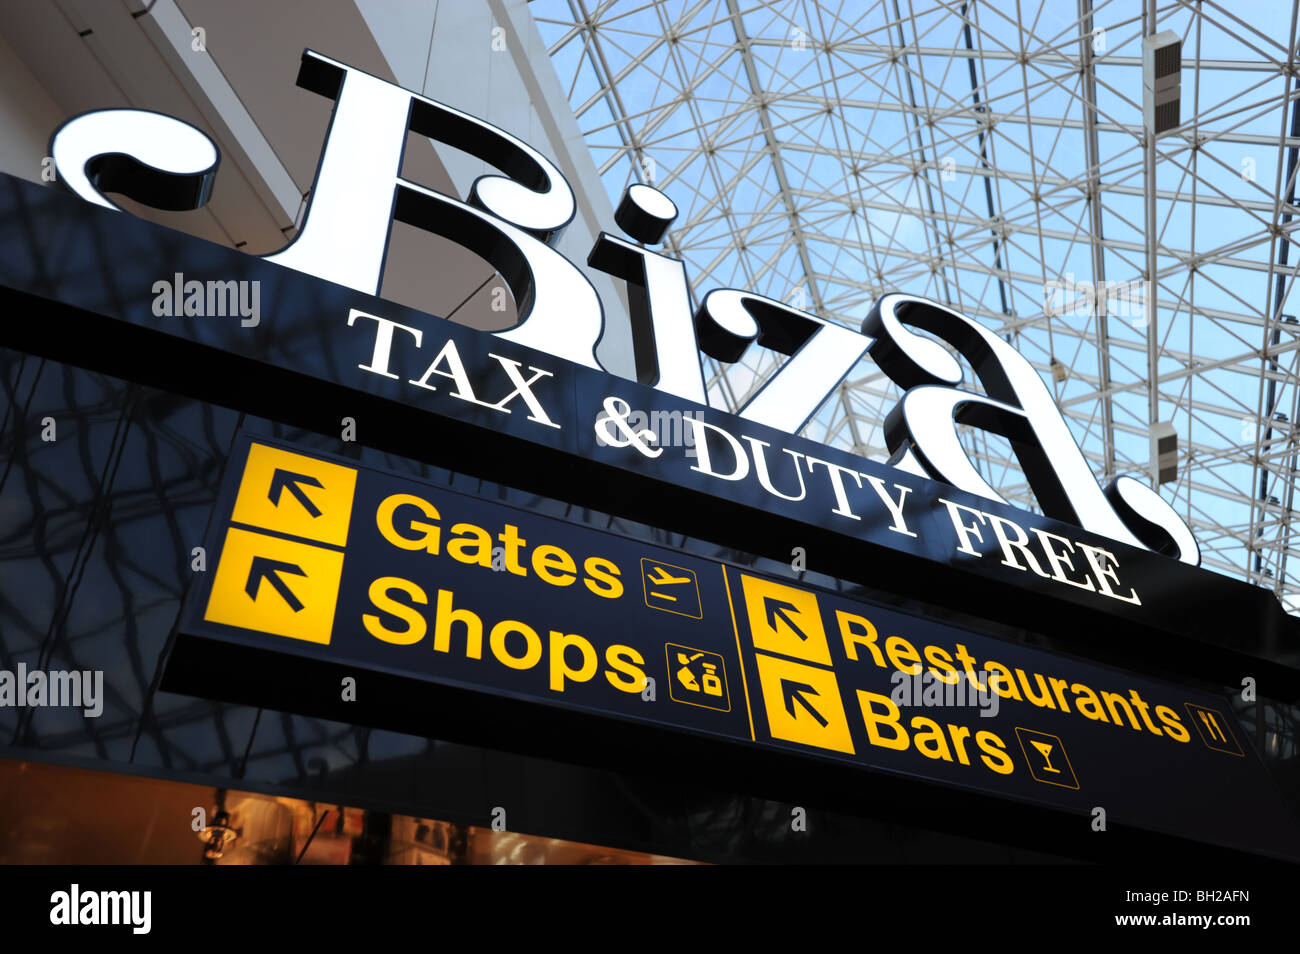 Negozi duty free e digital signage a Manchester Ringway airport Foto Stock